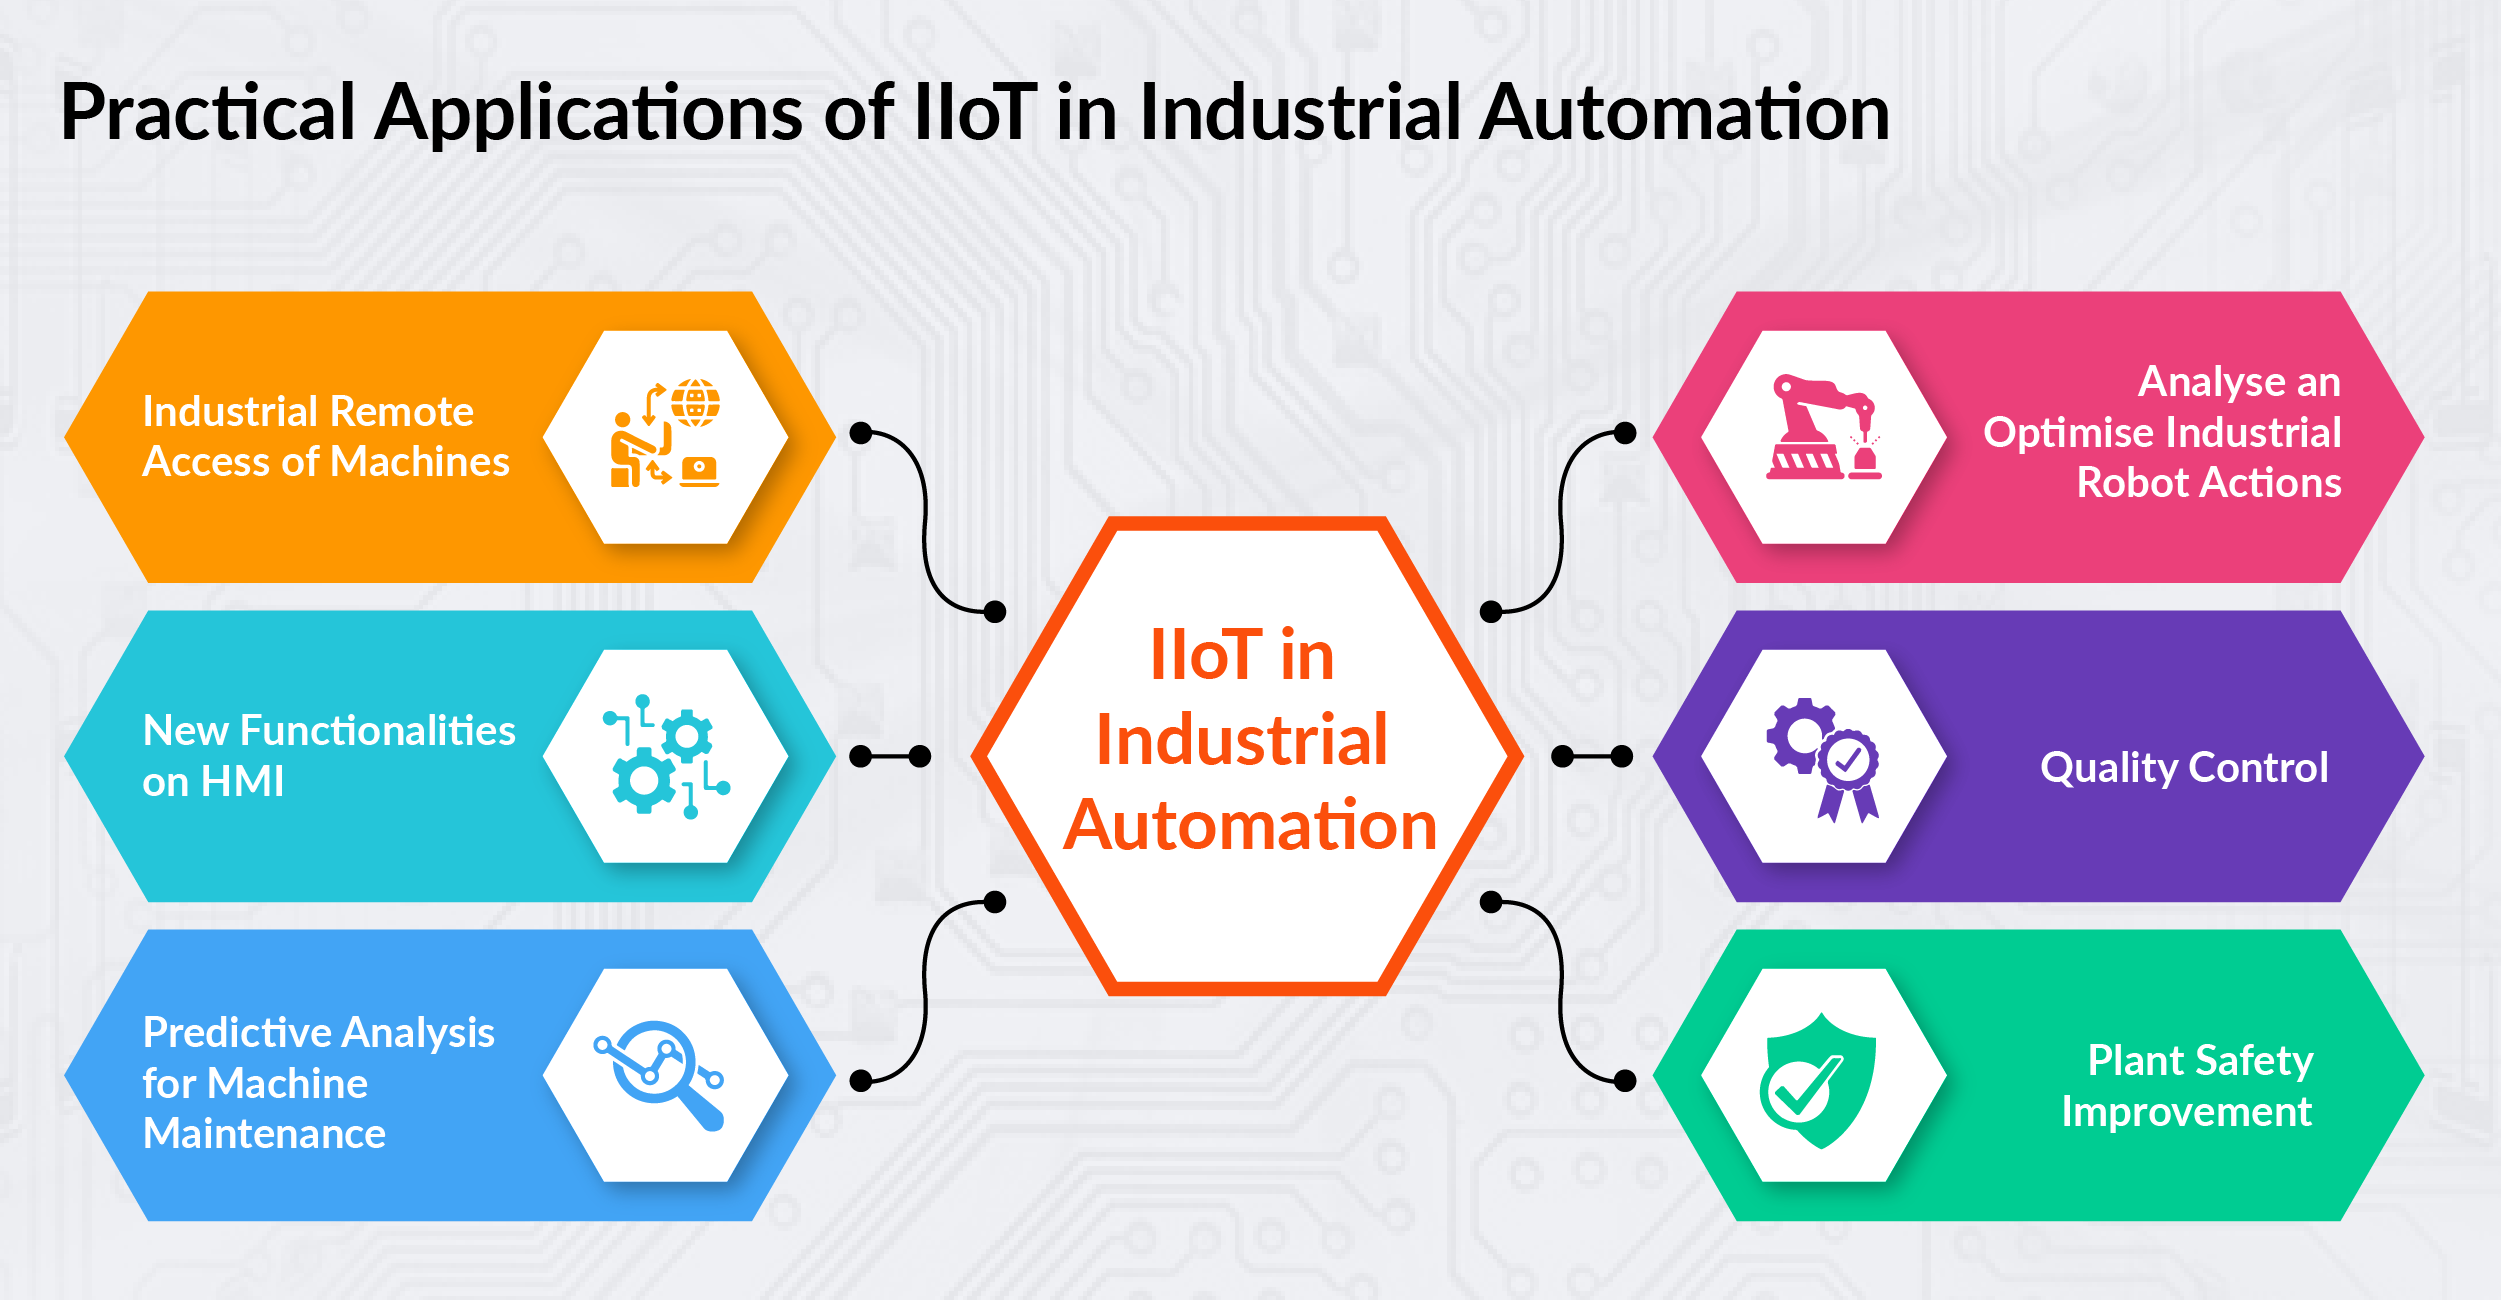 Practical Applications of IIoT in Industrial Automation